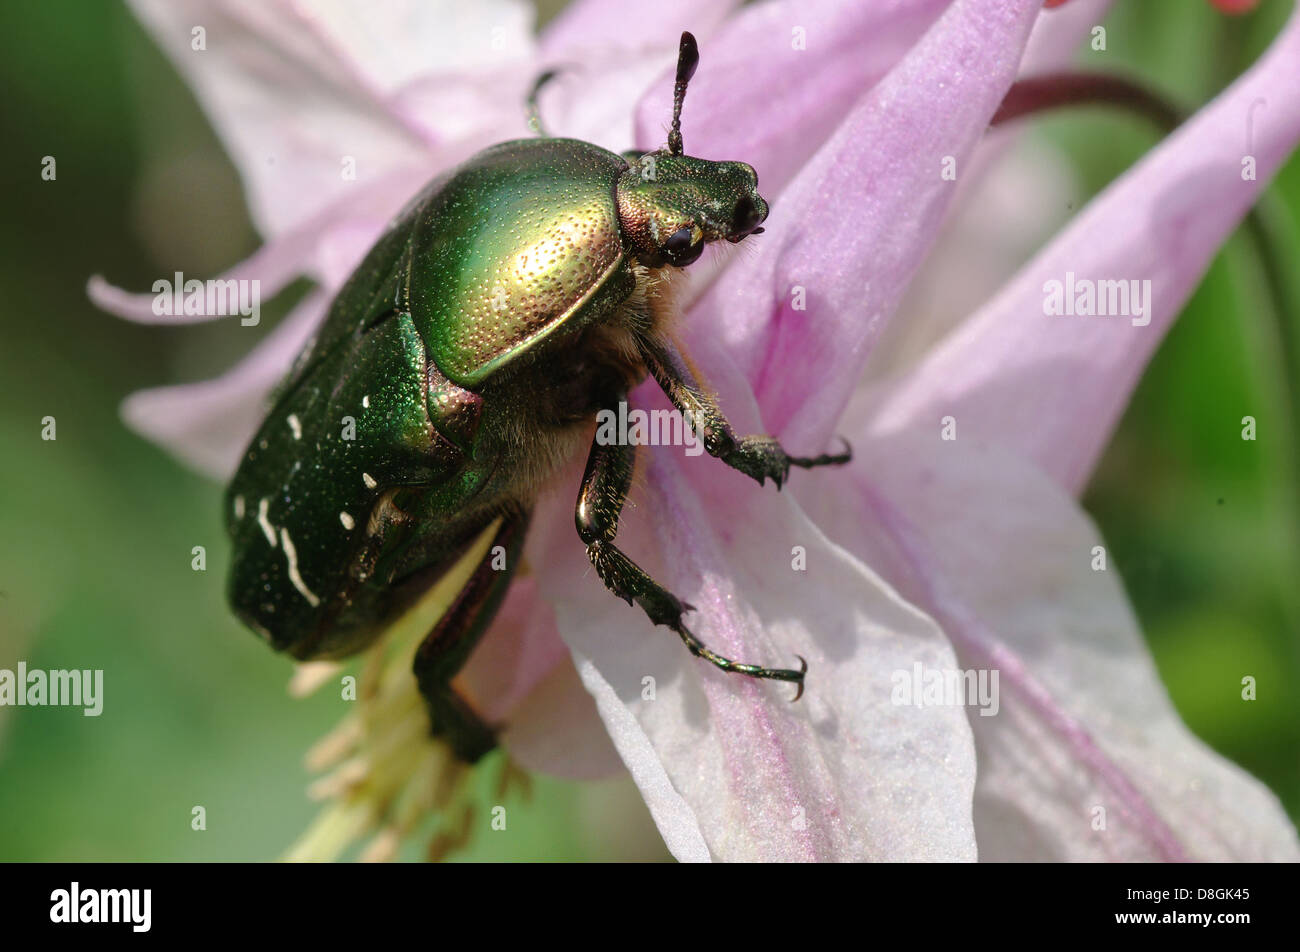 Rose chafer beetle Foto Stock